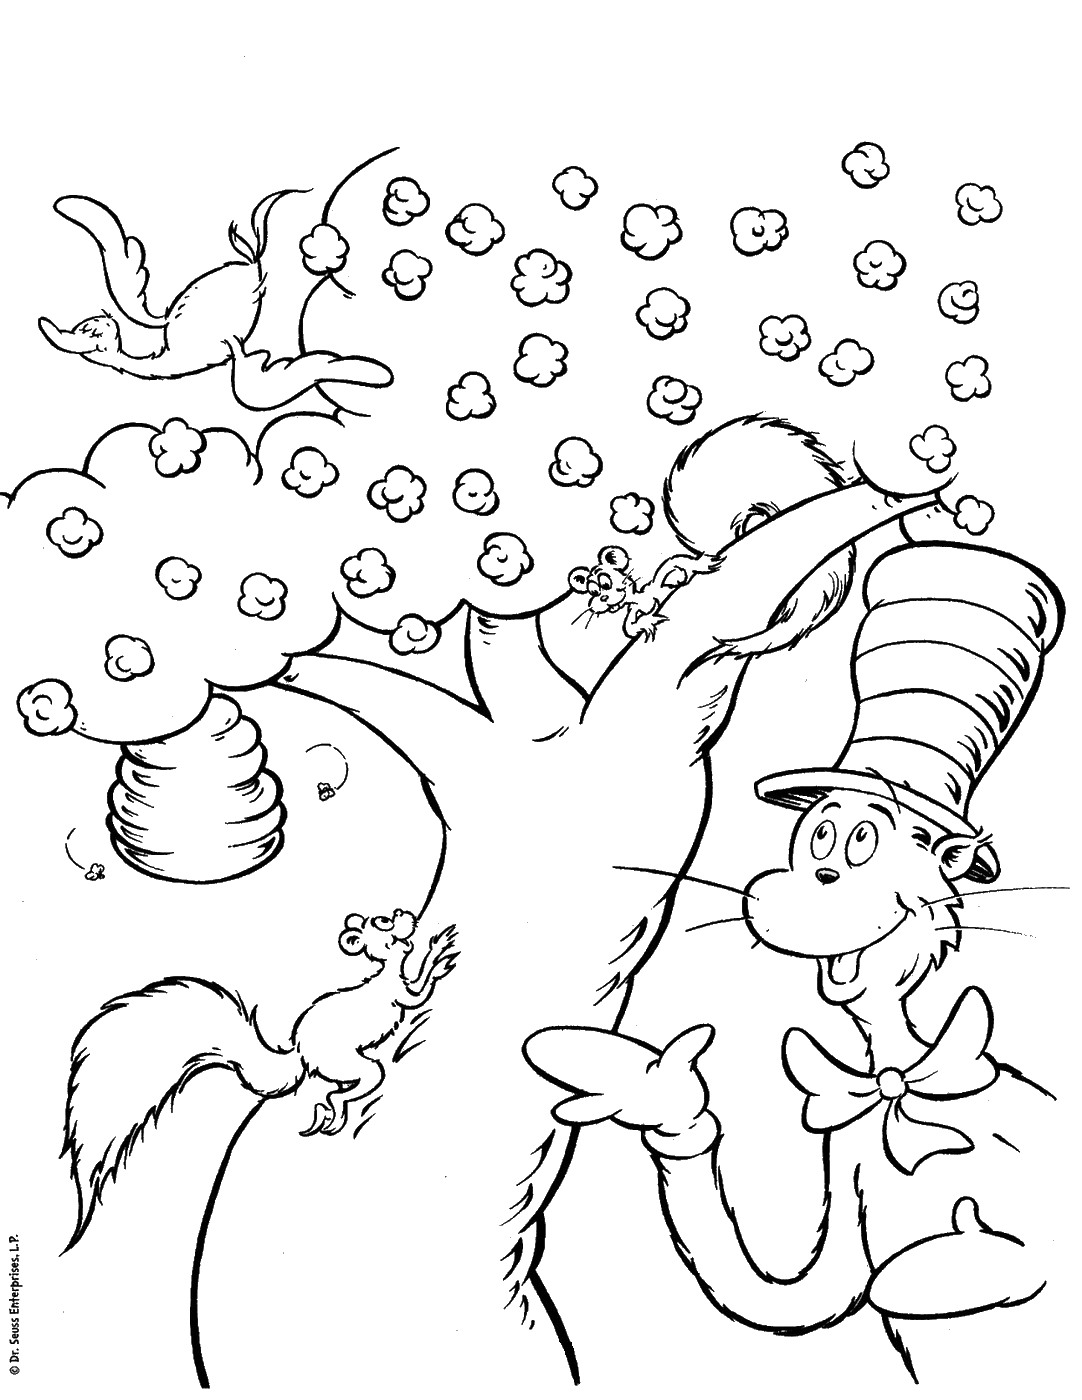 the cat in the hat coloring pages printable cat in the hat welcome coloring pages coloring pages for kids cat hat pages the coloring the in printable 